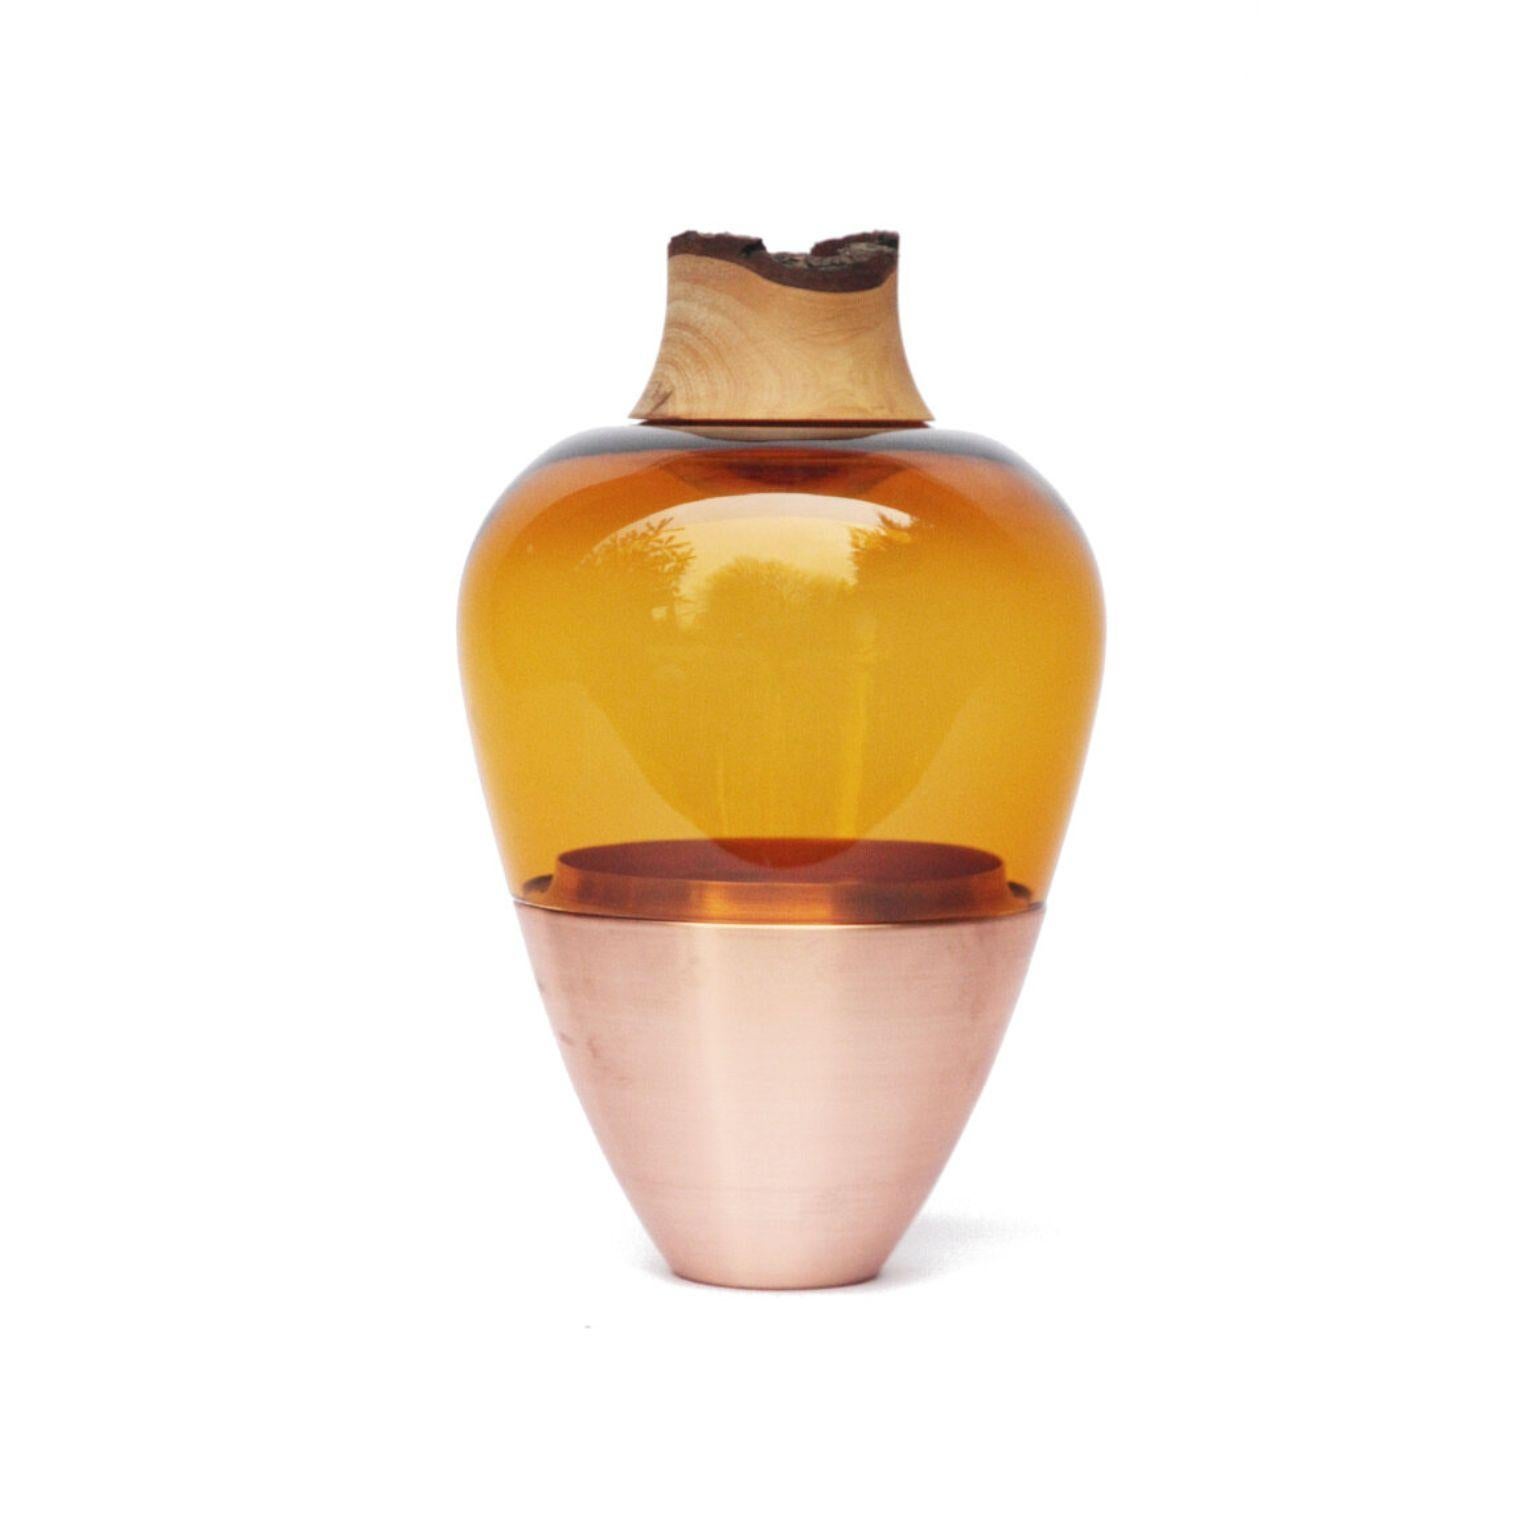 Amber and Copper Sculpted Blown Glass India Stacking Vessel, Pia Wüstenberg
Dimensions: height 20 x diameter 38cm
Materials: hand blown glass, brass

Pia Wüstenberg, Utopia
Pia Wüstenberg is a creative with a passion for materials and craft. She